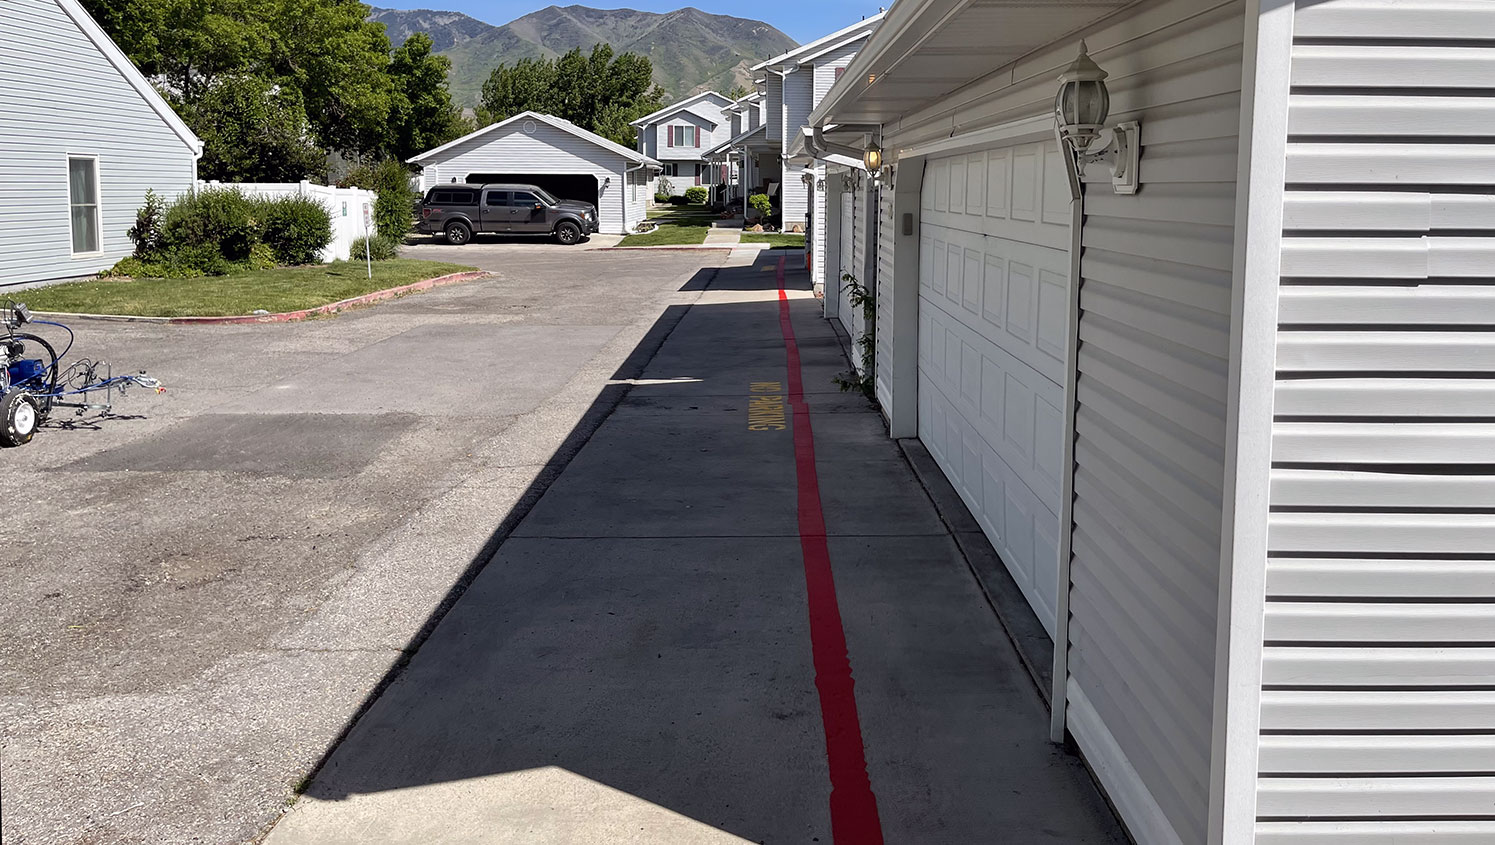 new fire lane striping at Millpond Condos in Stansbury Park, UT